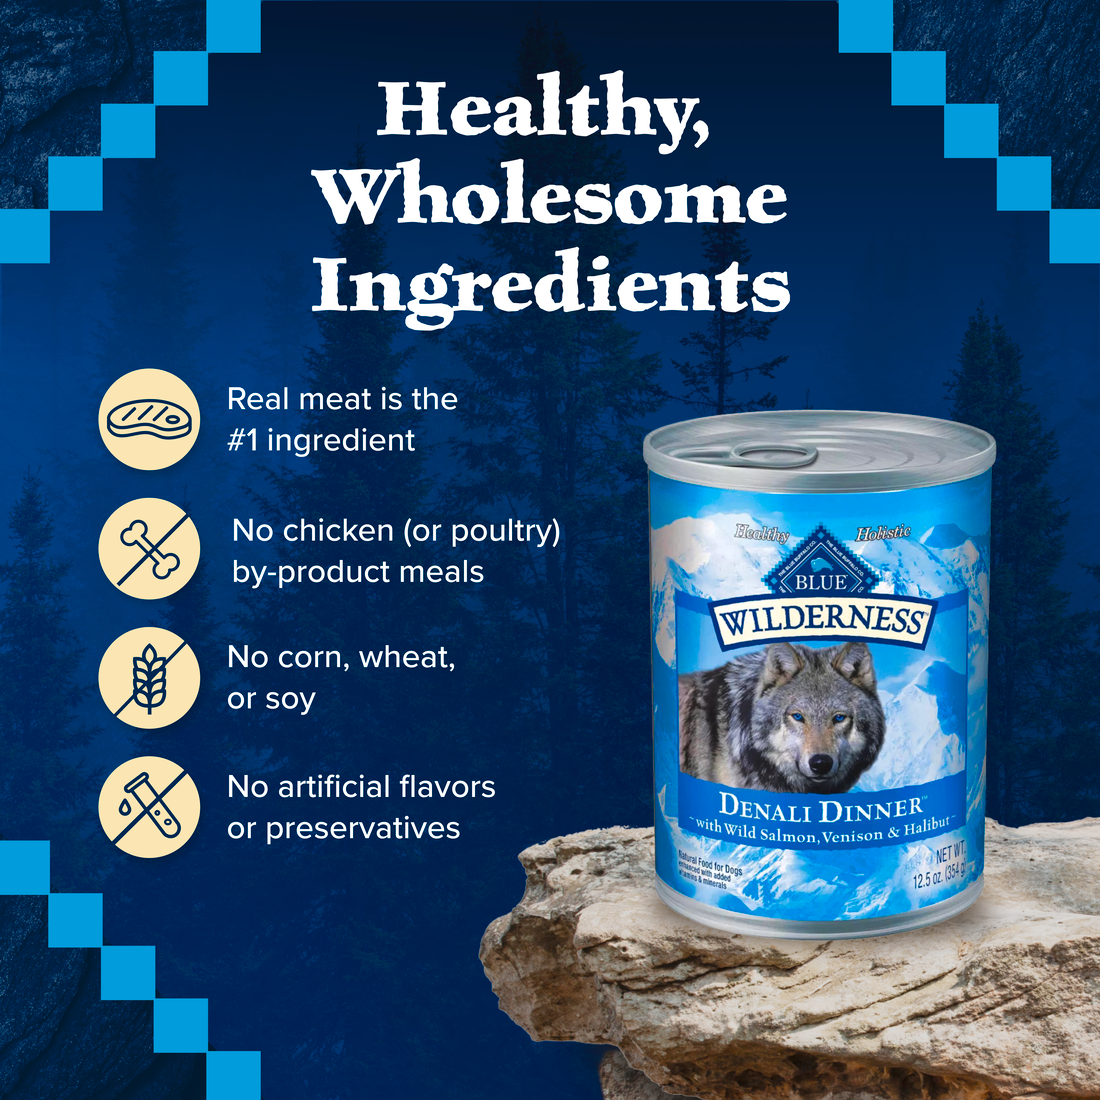 Blue Buffalo Wilderness Denali Dinner with Salmon, Venison & Halibut Canned Dog Food